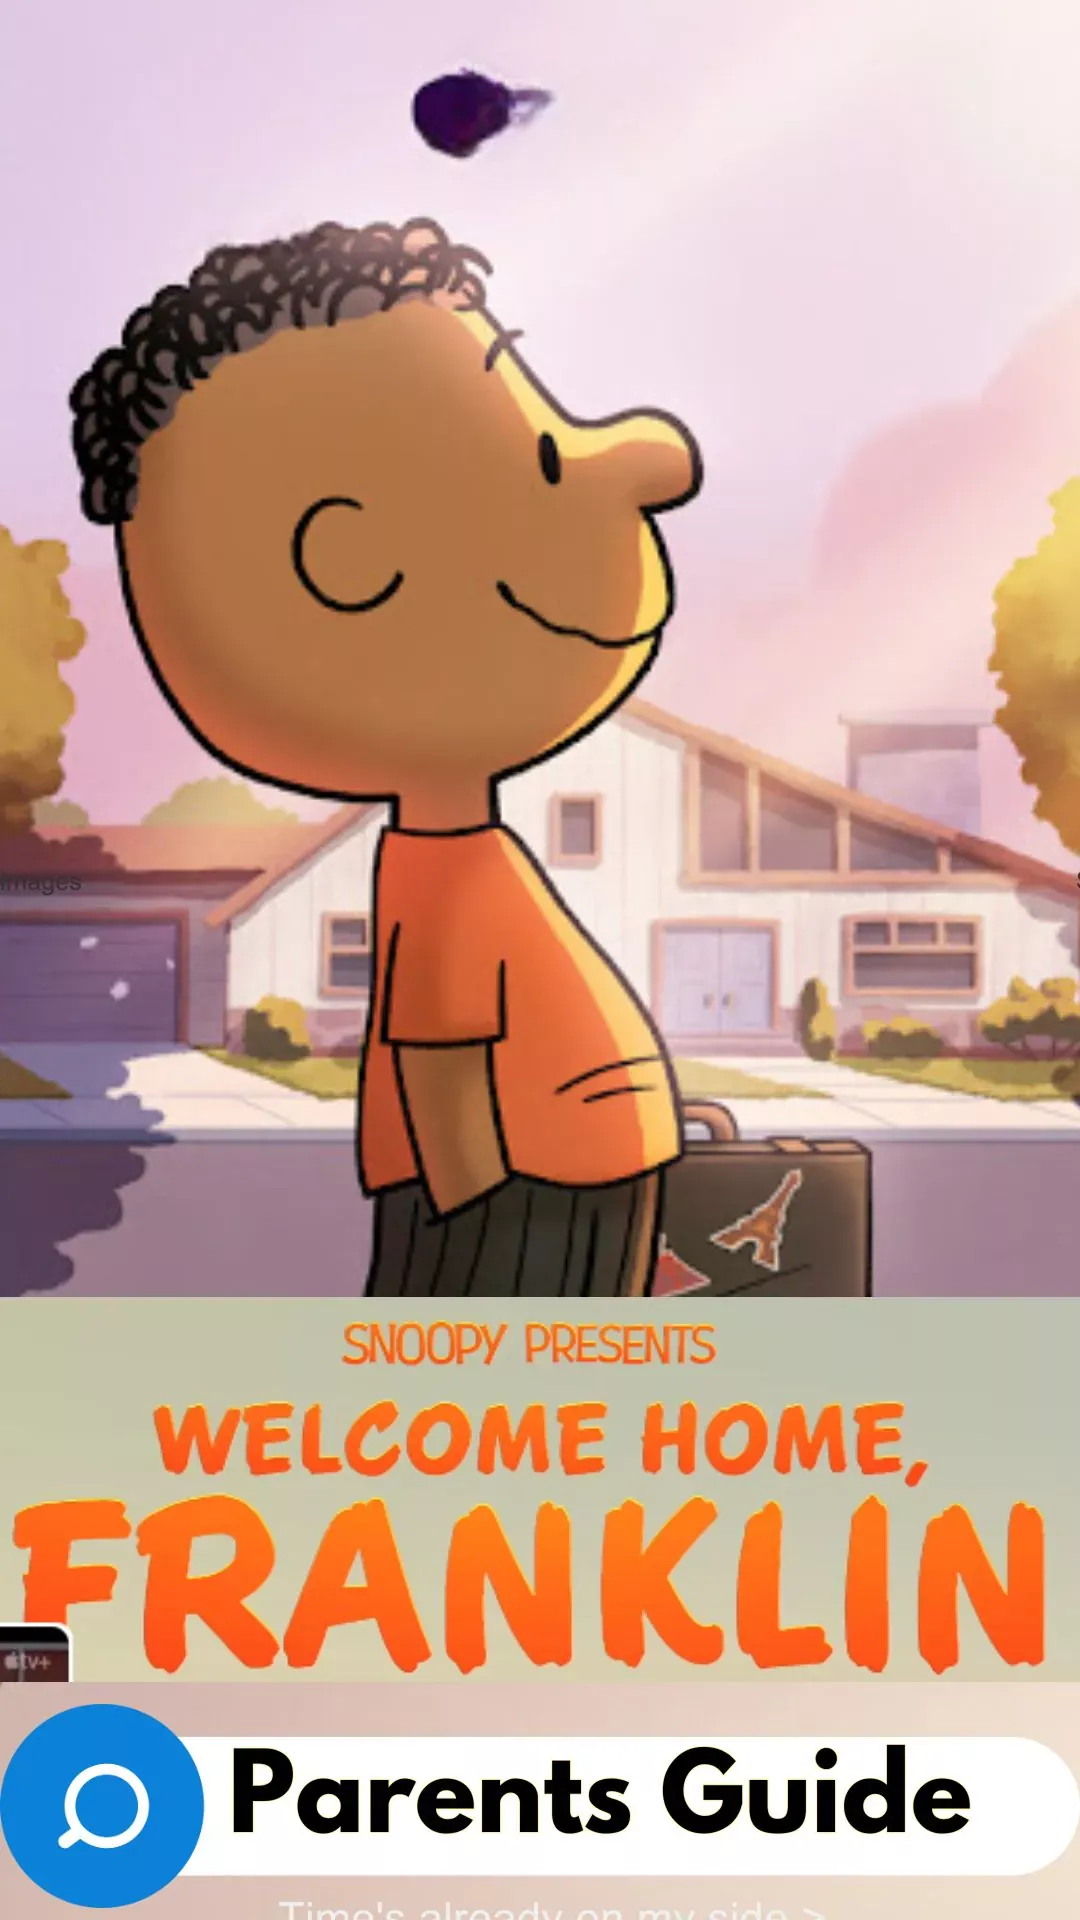 Snoopy Presents Welcome Home, Parents Guide (1)